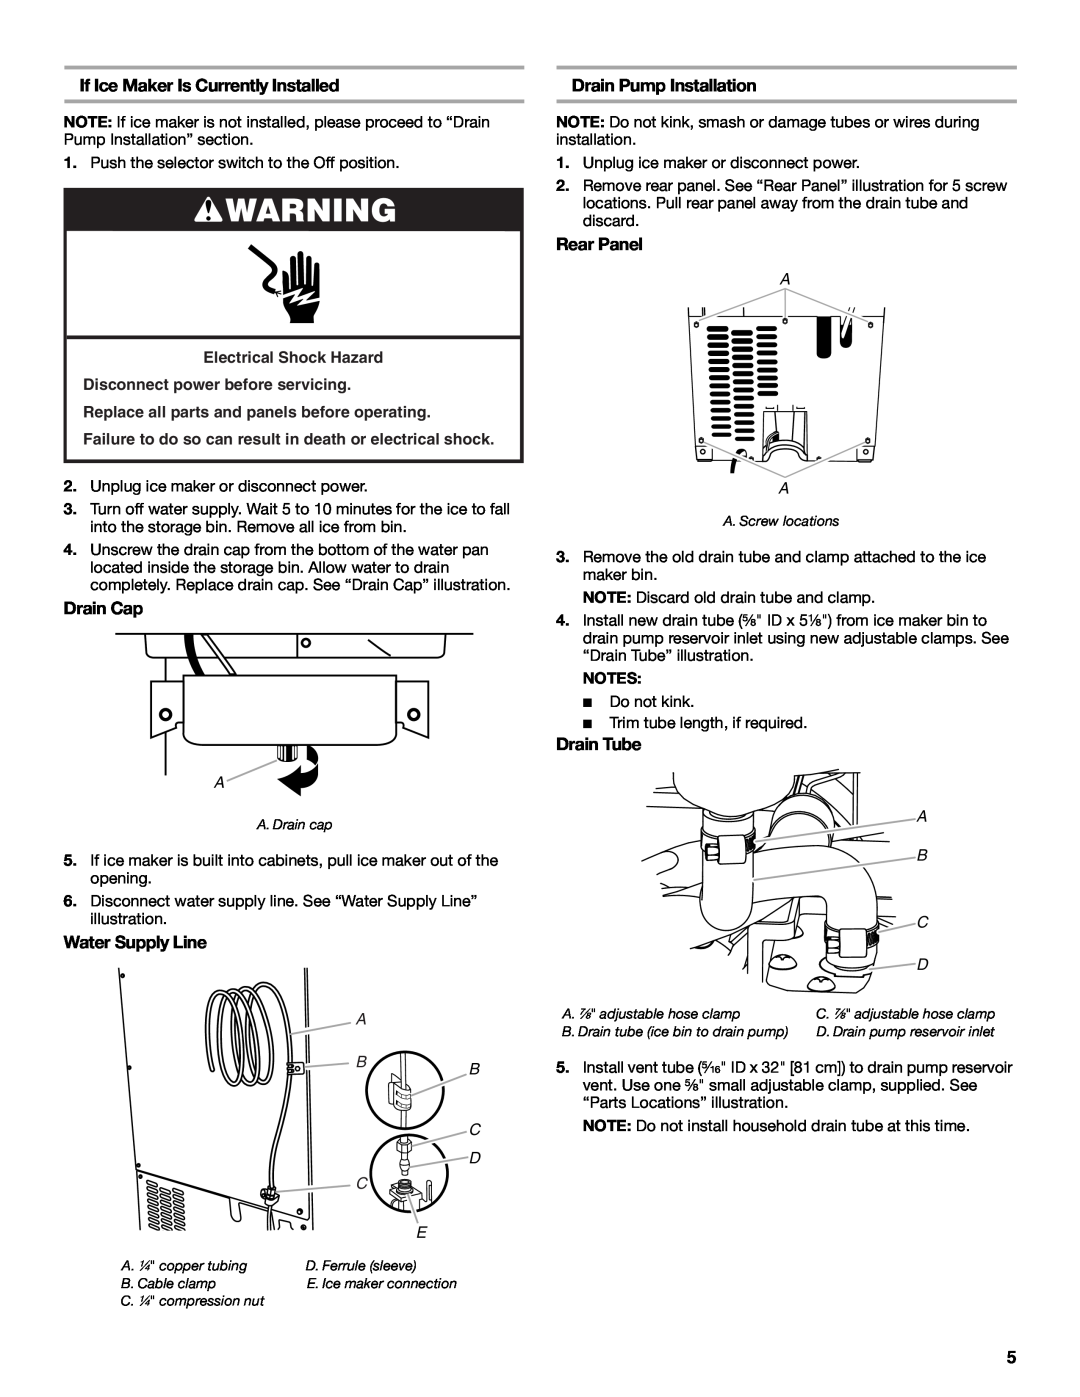 Whirlpool W10541636B If Ice Maker Is Currently Installed, Drain Cap, Water Supply Line, Drain Pump Installation 